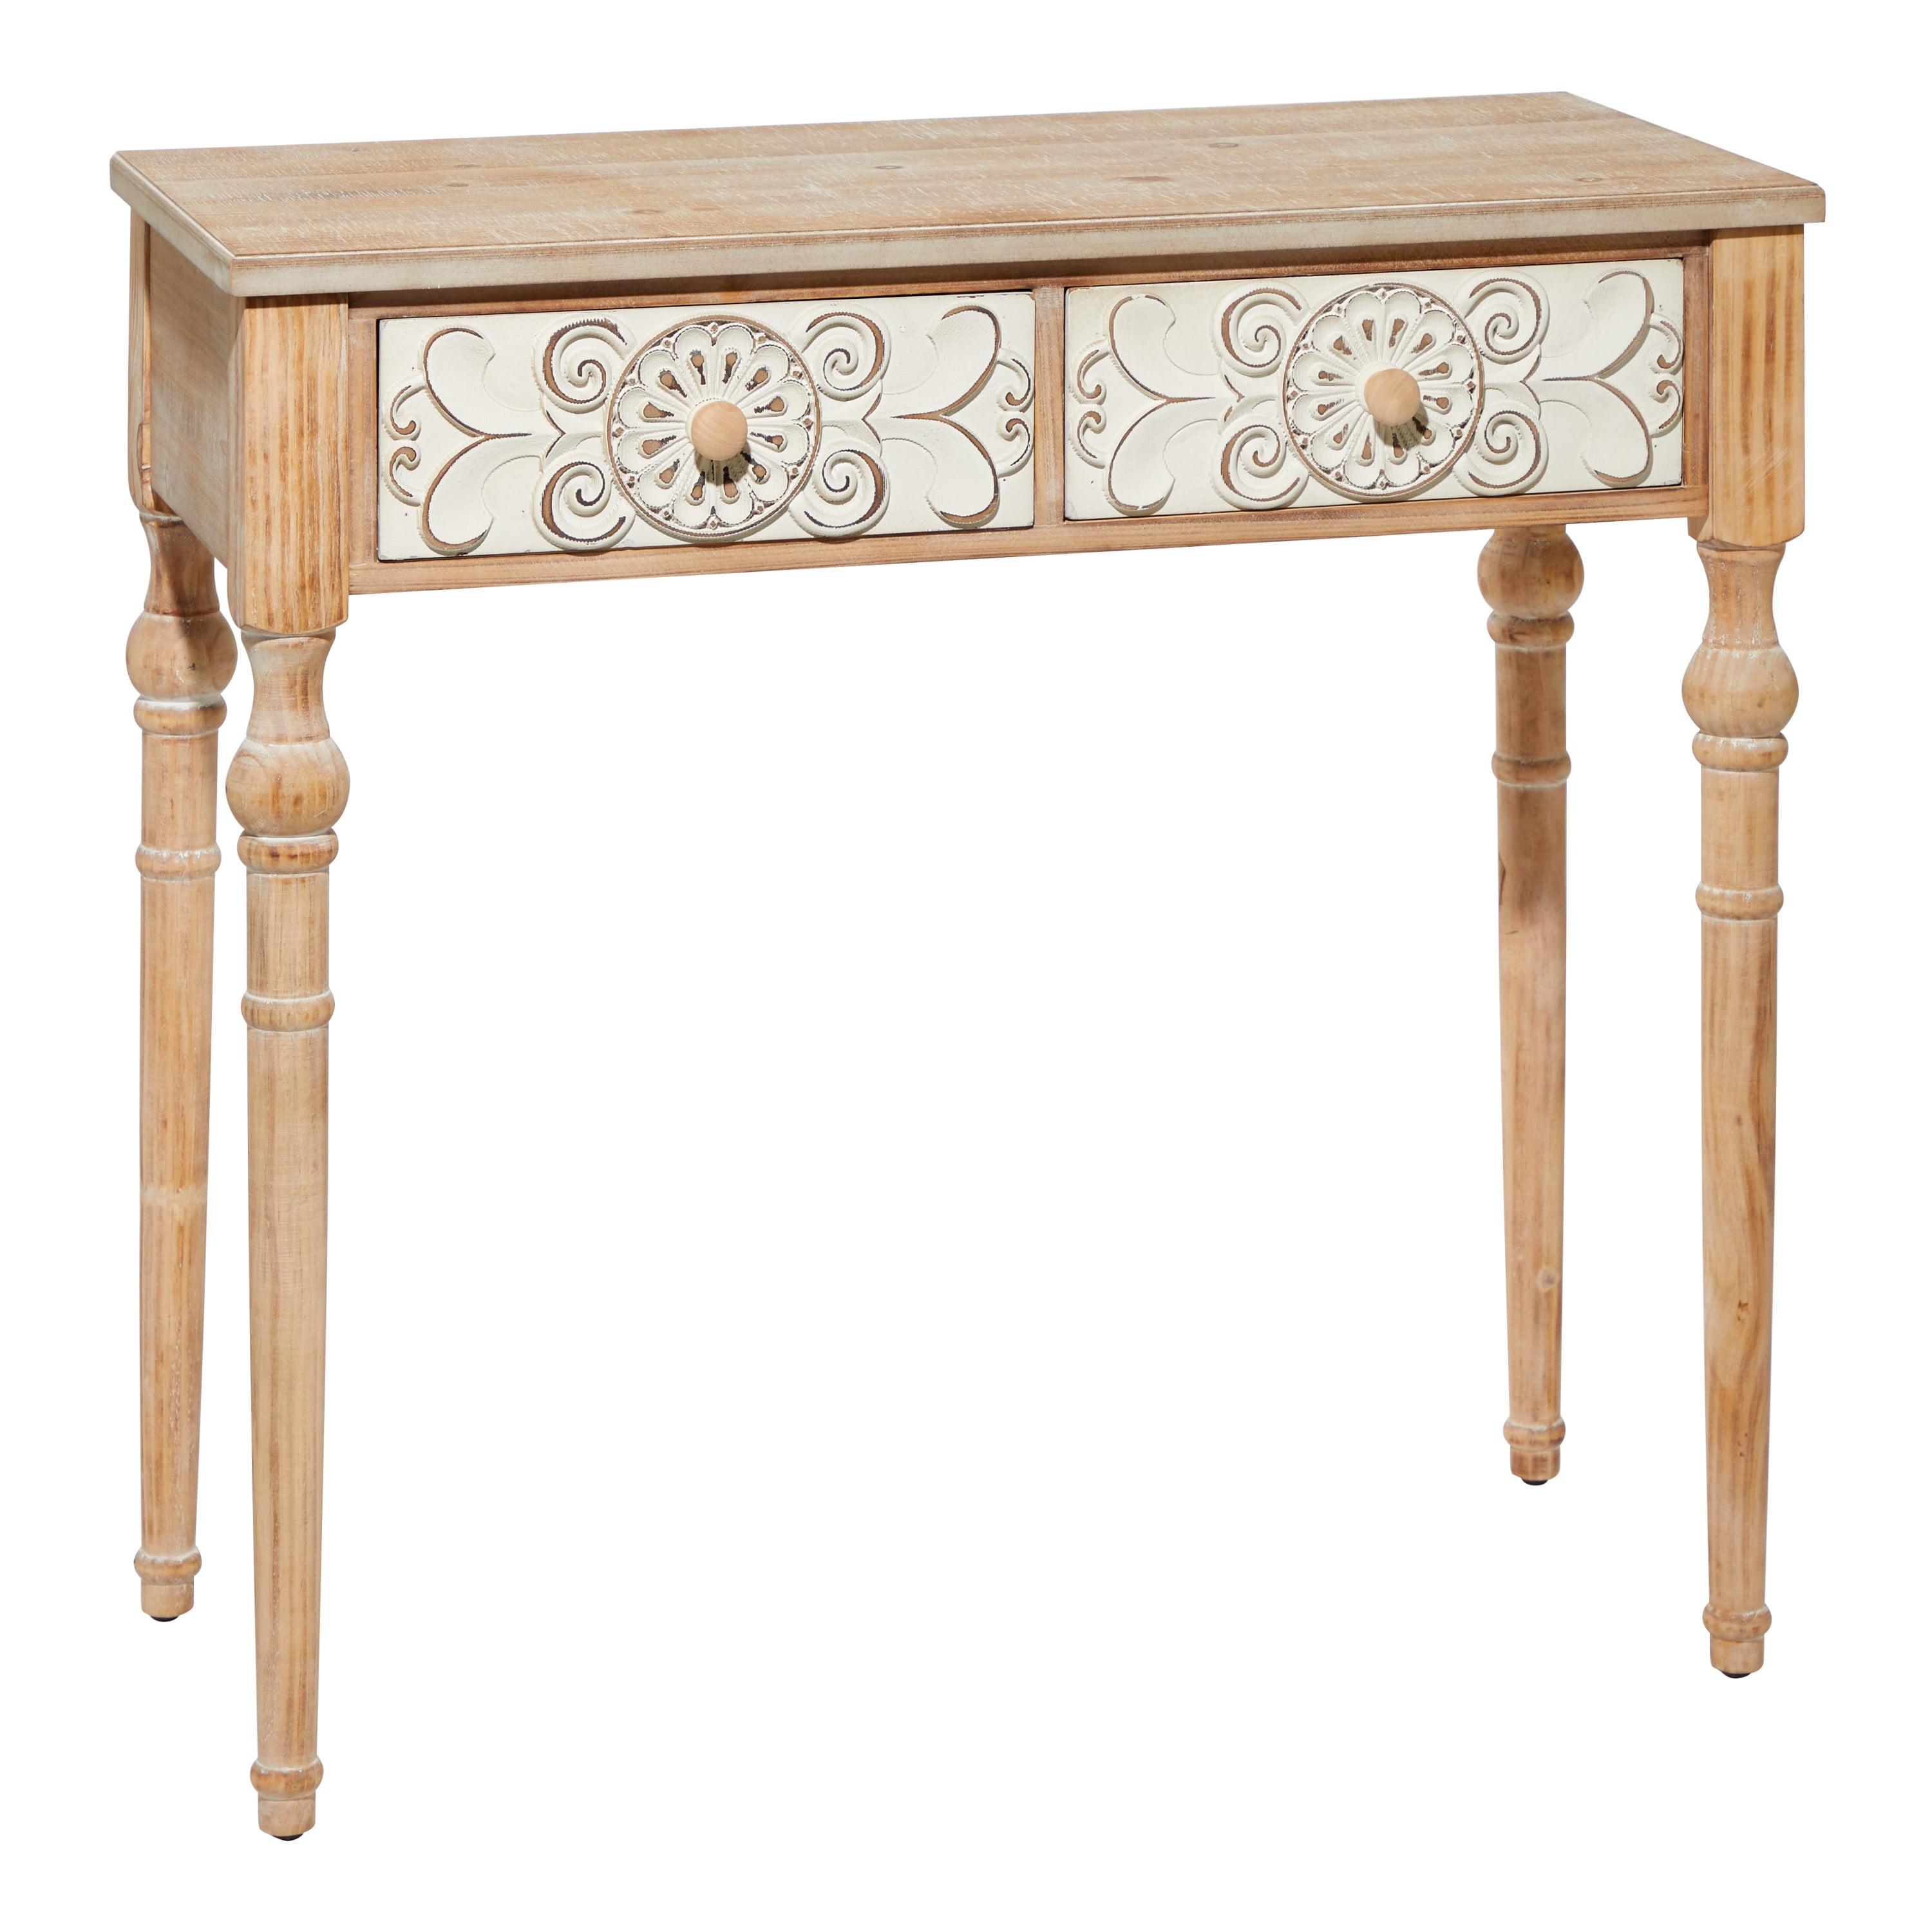 Elegant Farmhouse Brown Wood and Glass Console Table with Carved Floral Drawers